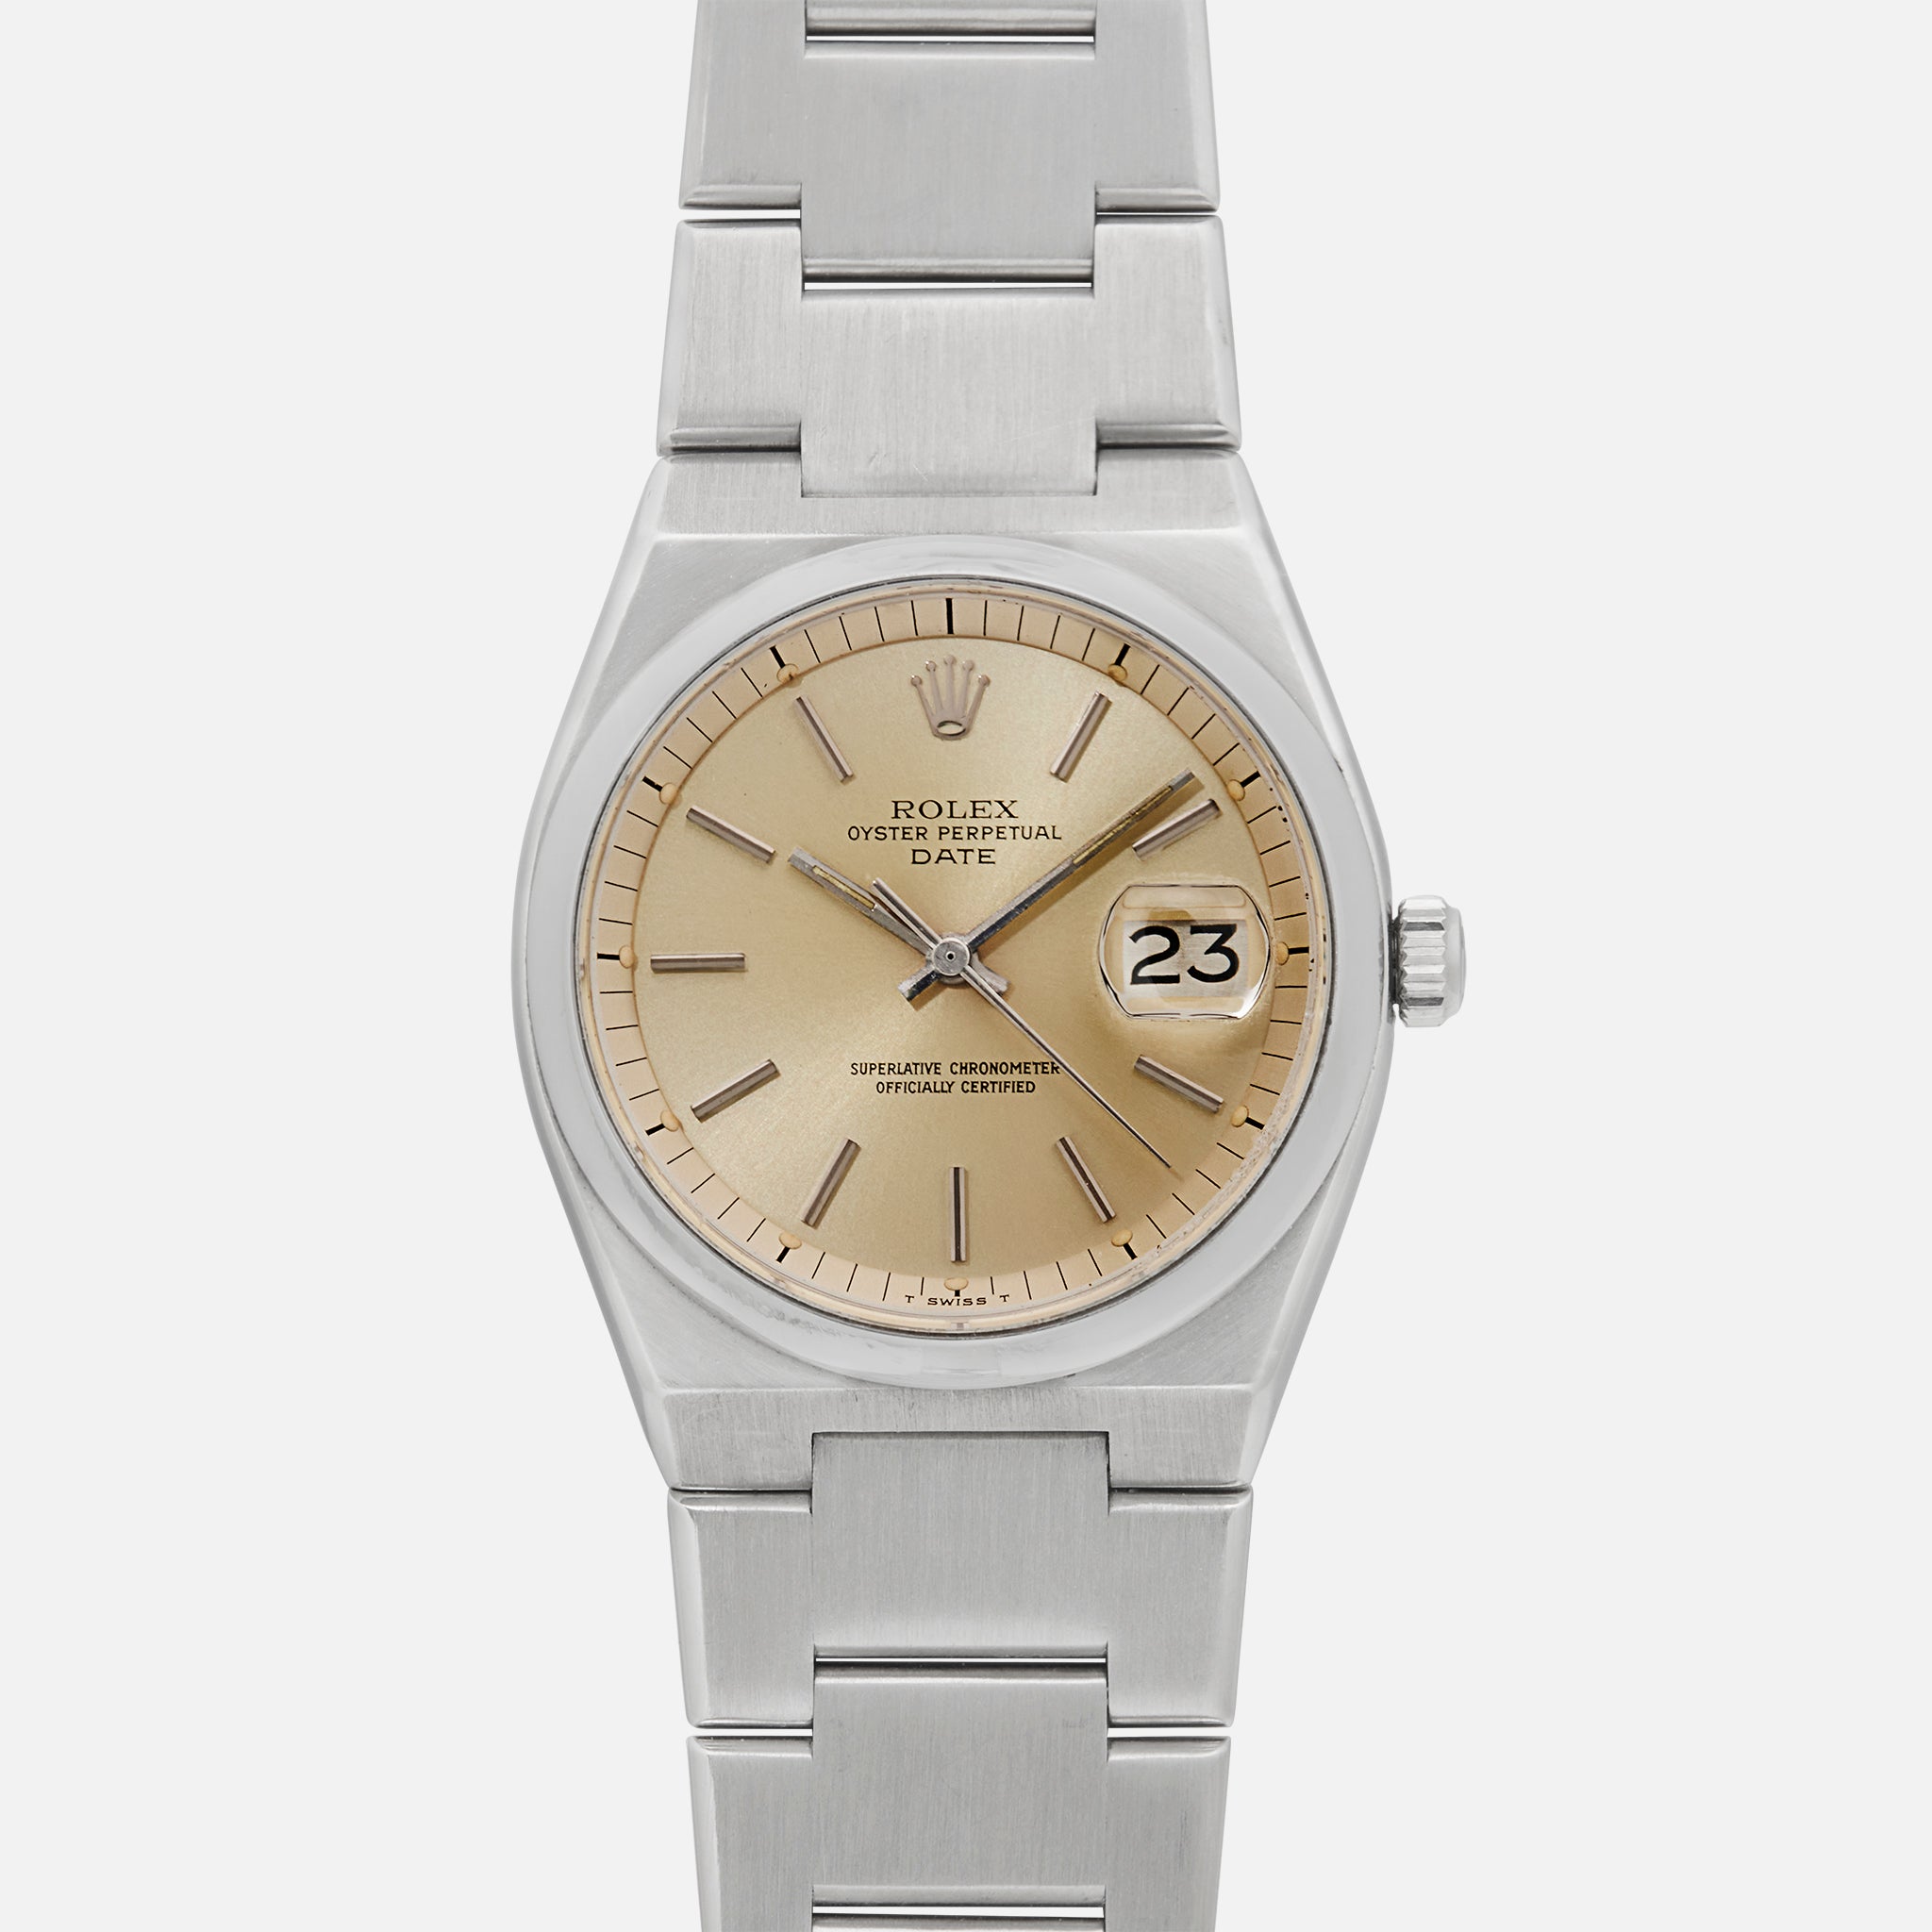 Image of 1977 Rolex Oyster Perpetual Date Ref. 1530